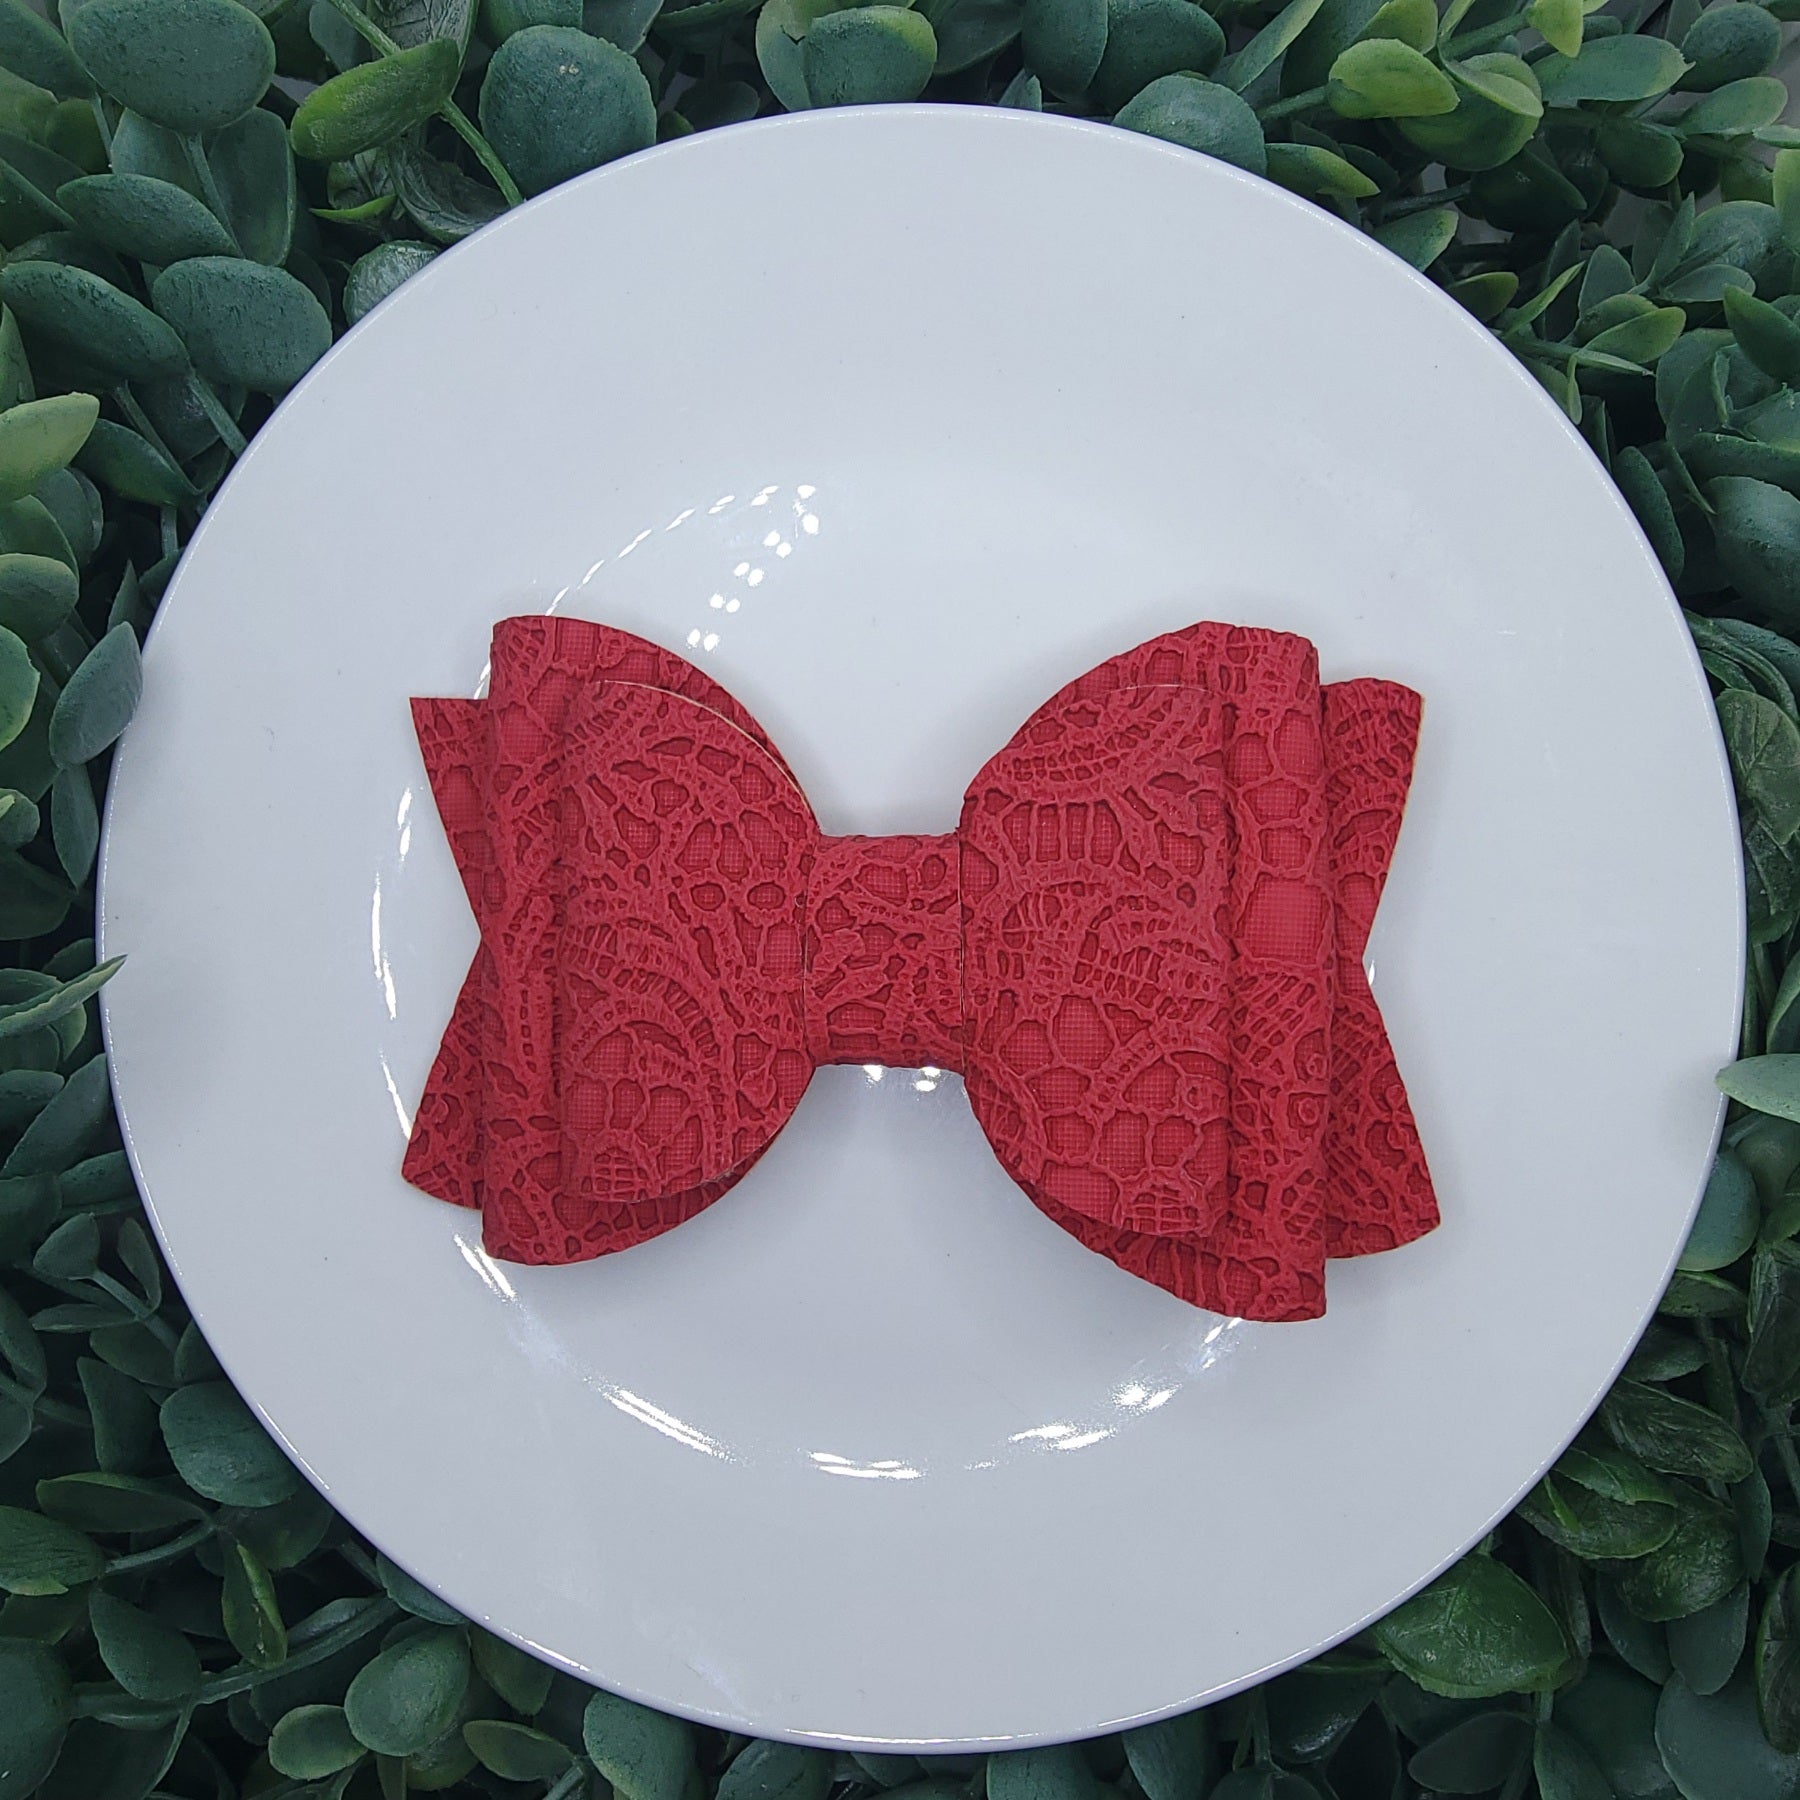 5" Lace Bow